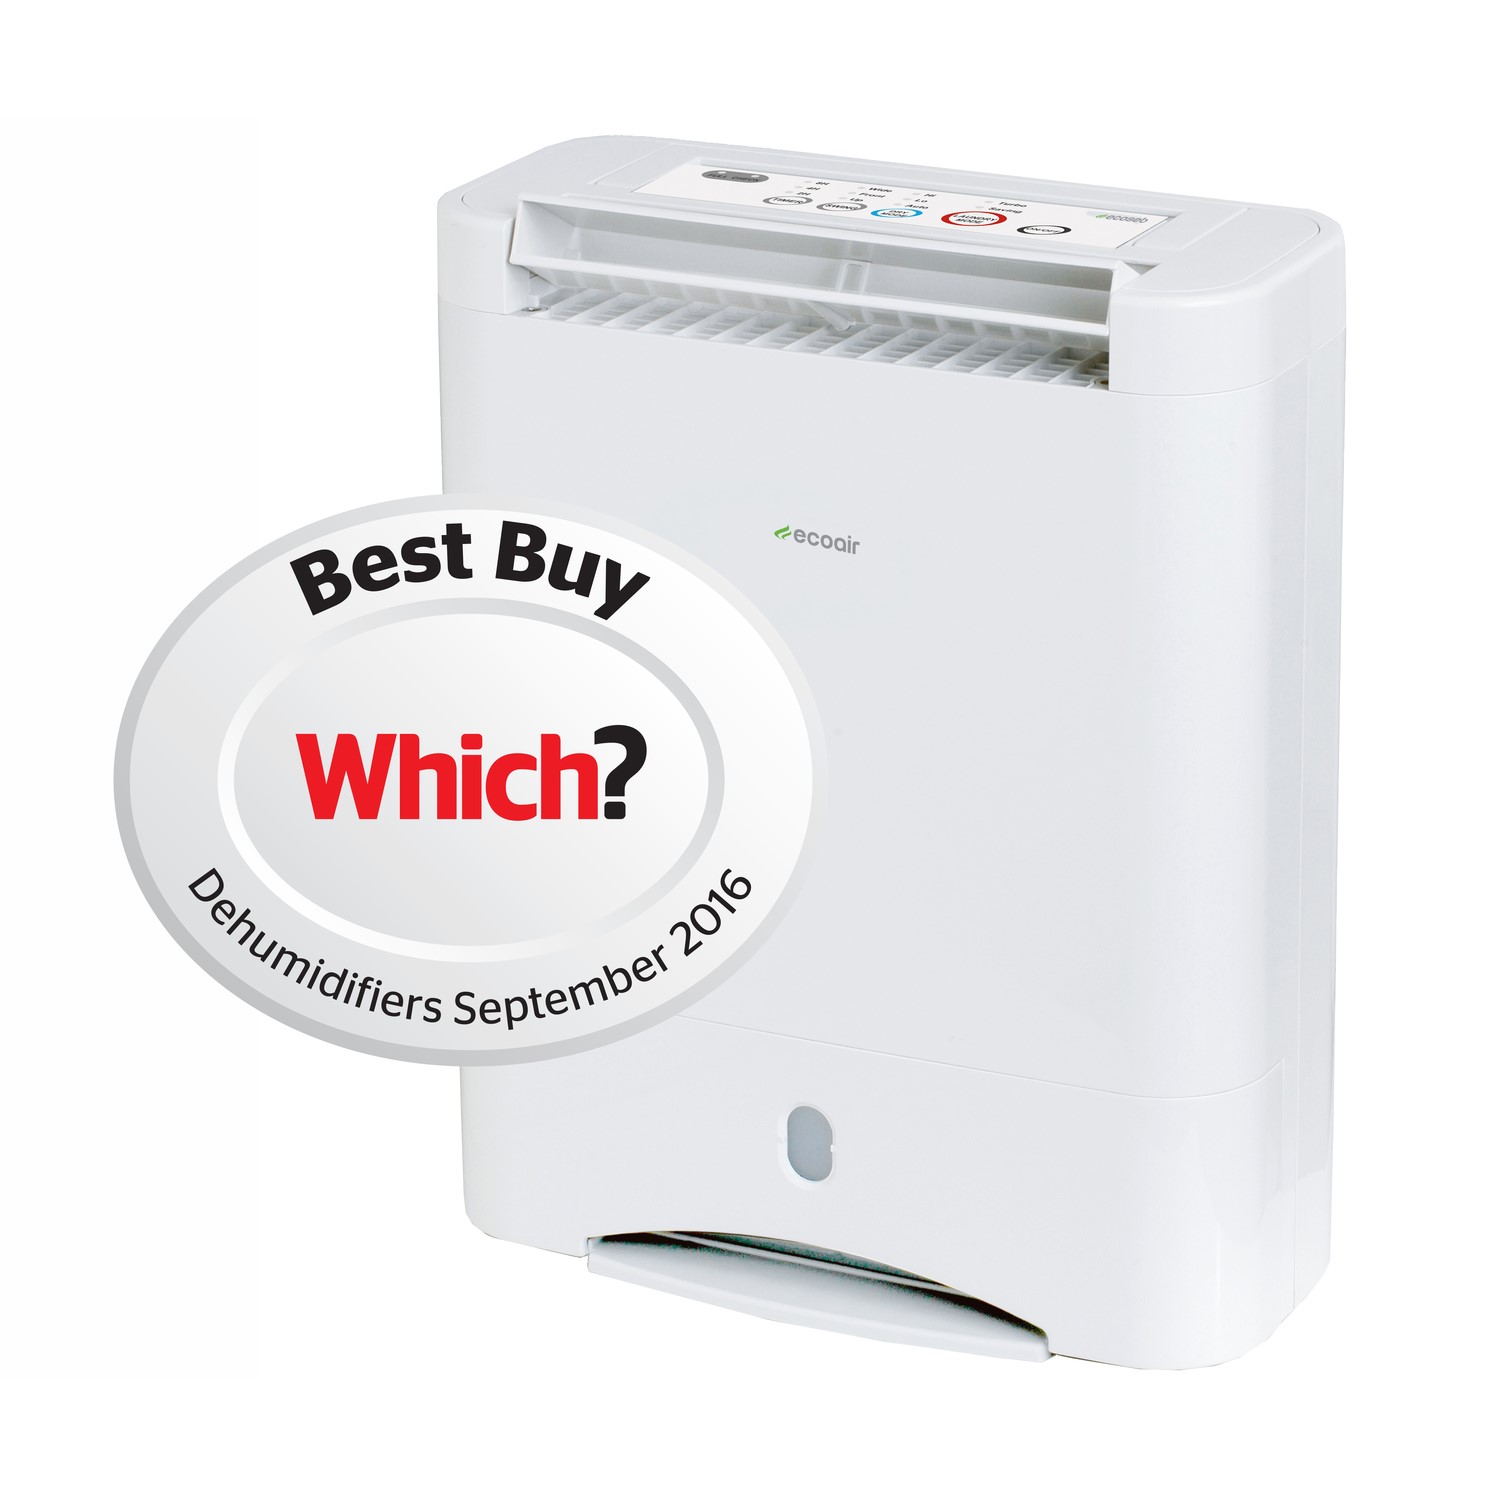 dehumidifier-which-is-best-to-buy